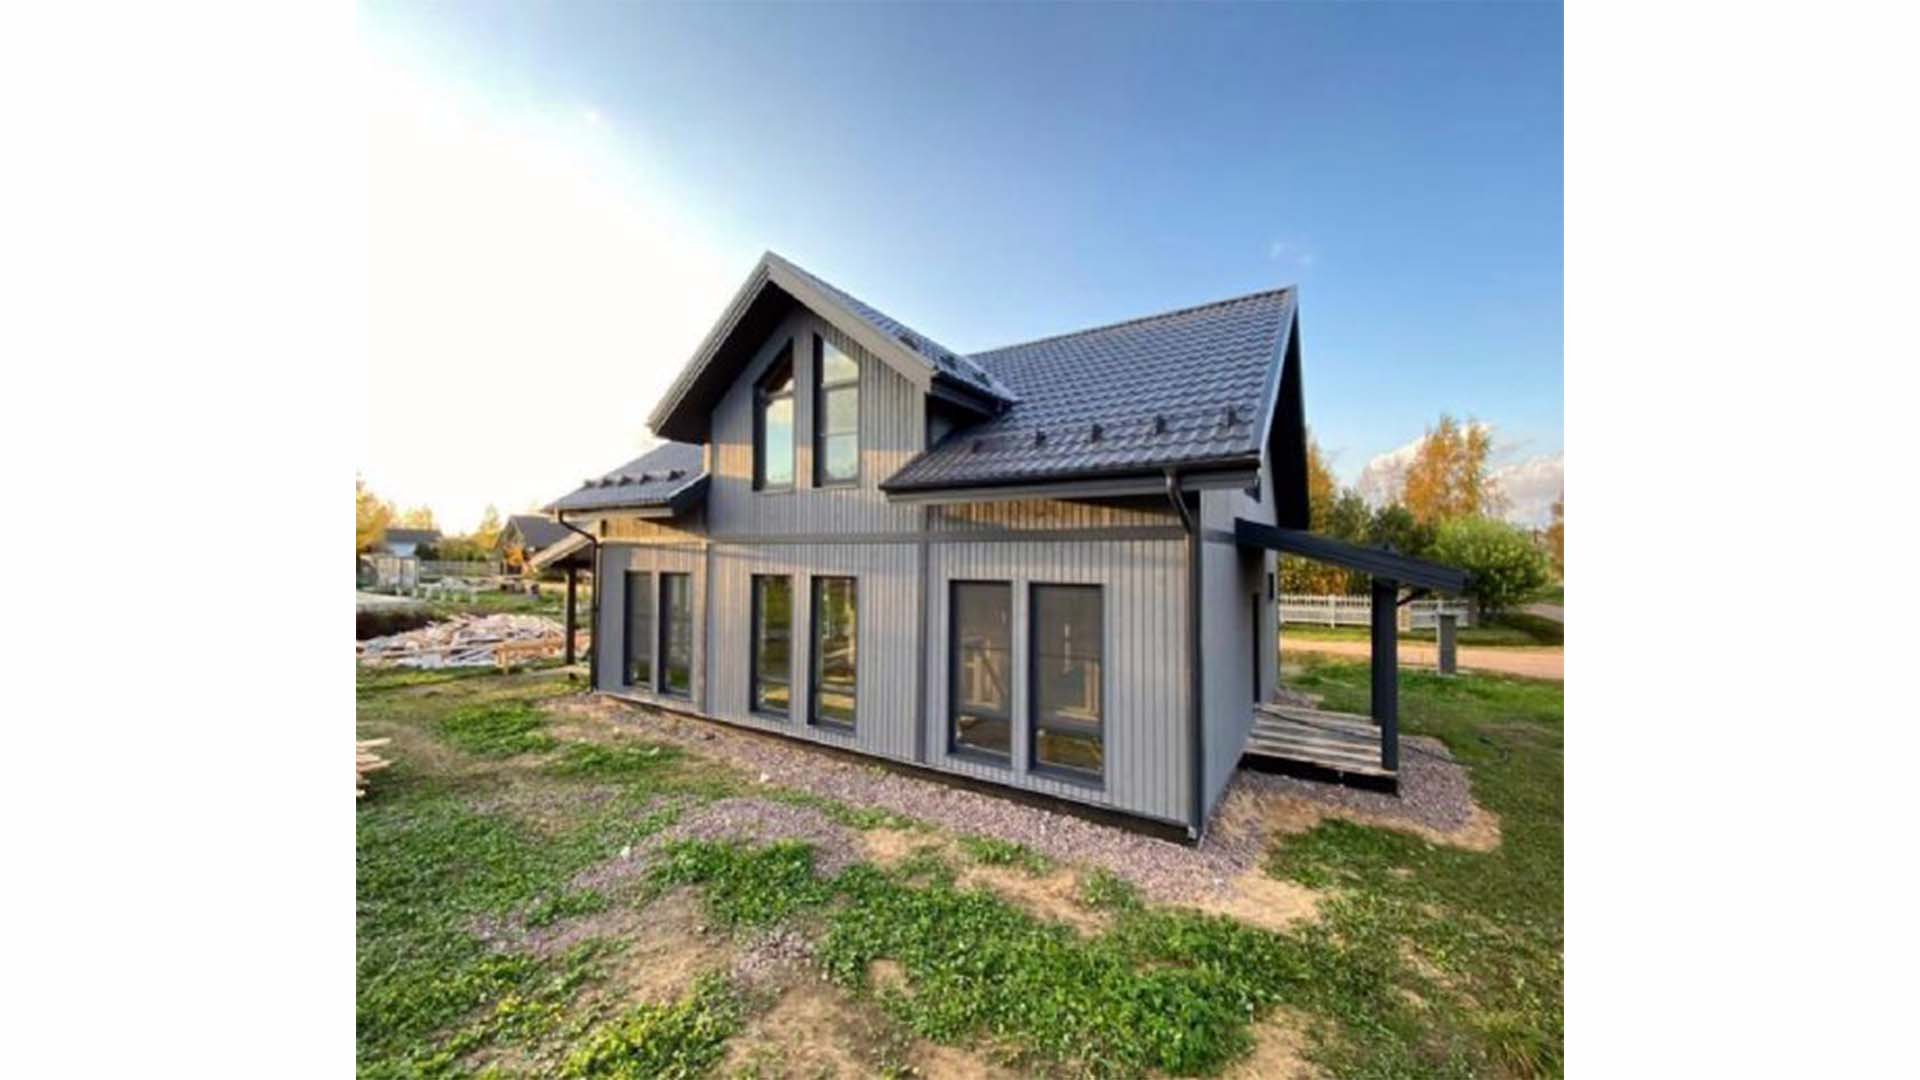 Prefabricated houses from as little as €70,000